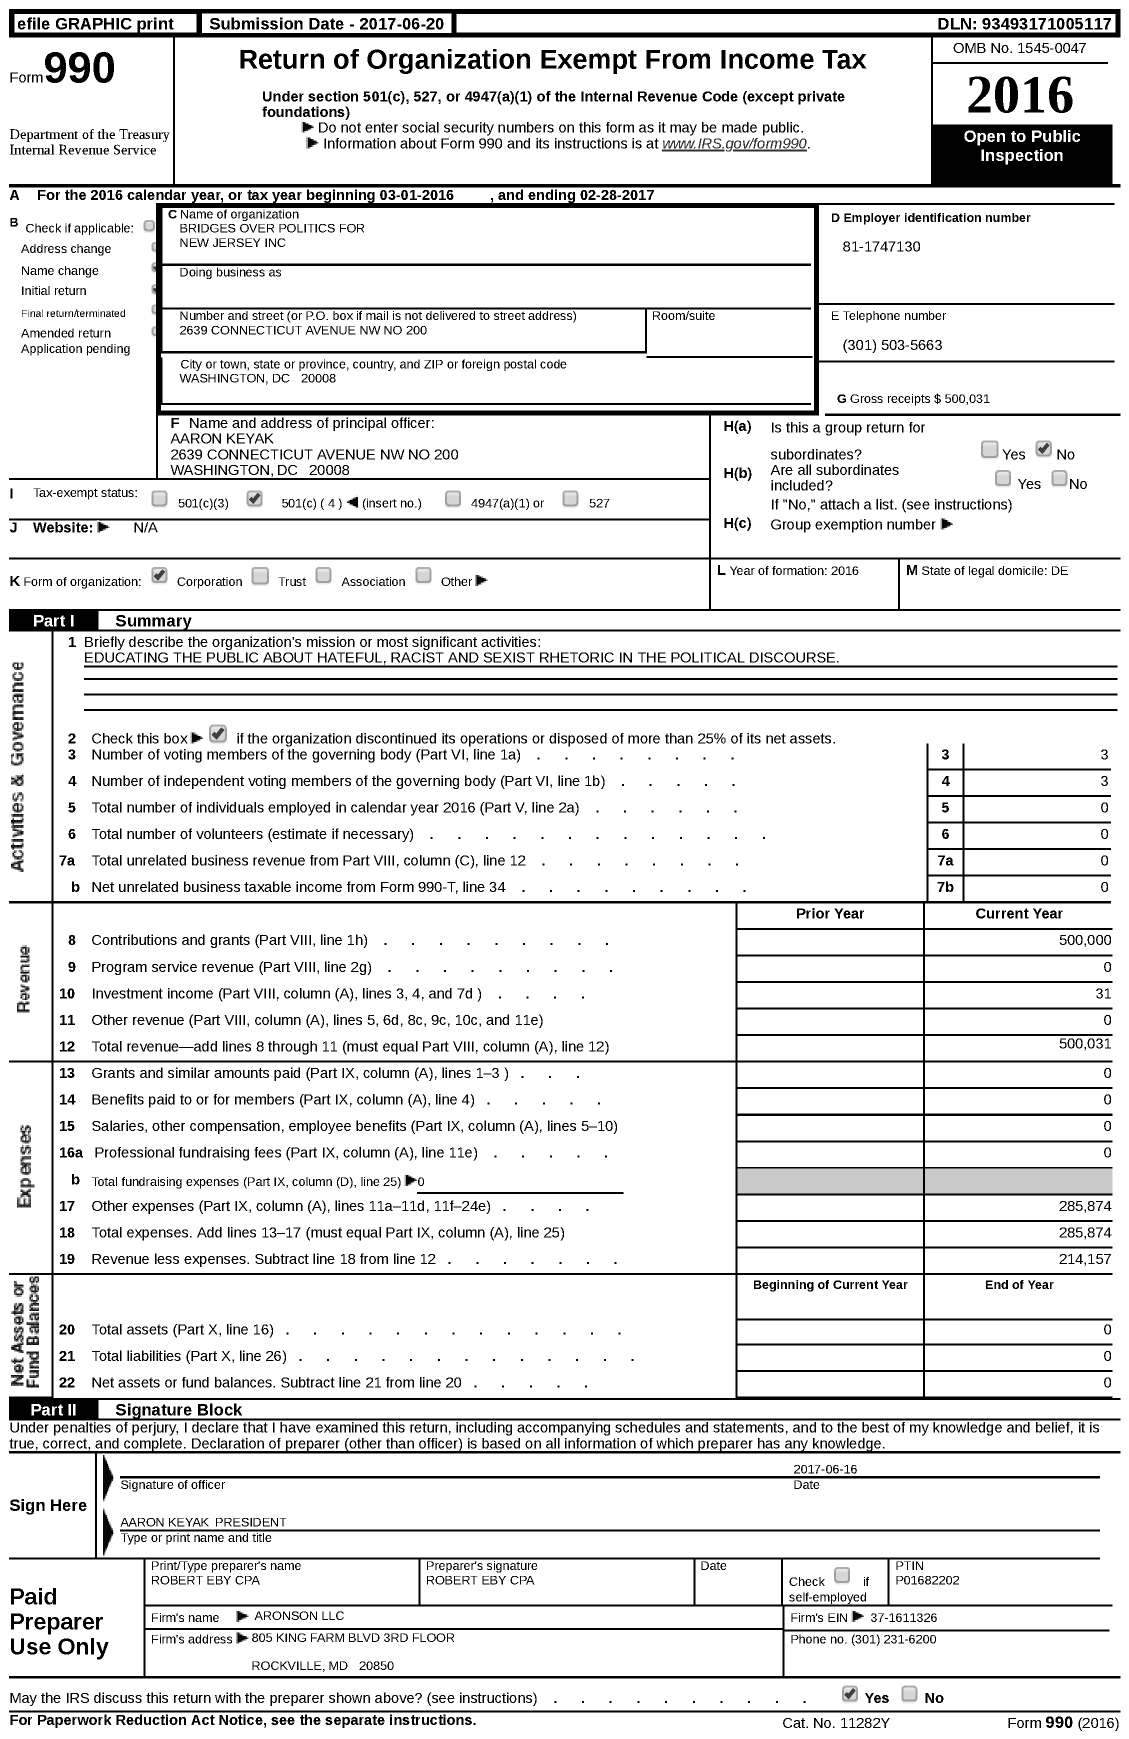 Image of first page of 2016 Form 990 for Bridges Over Politics for New Jersey